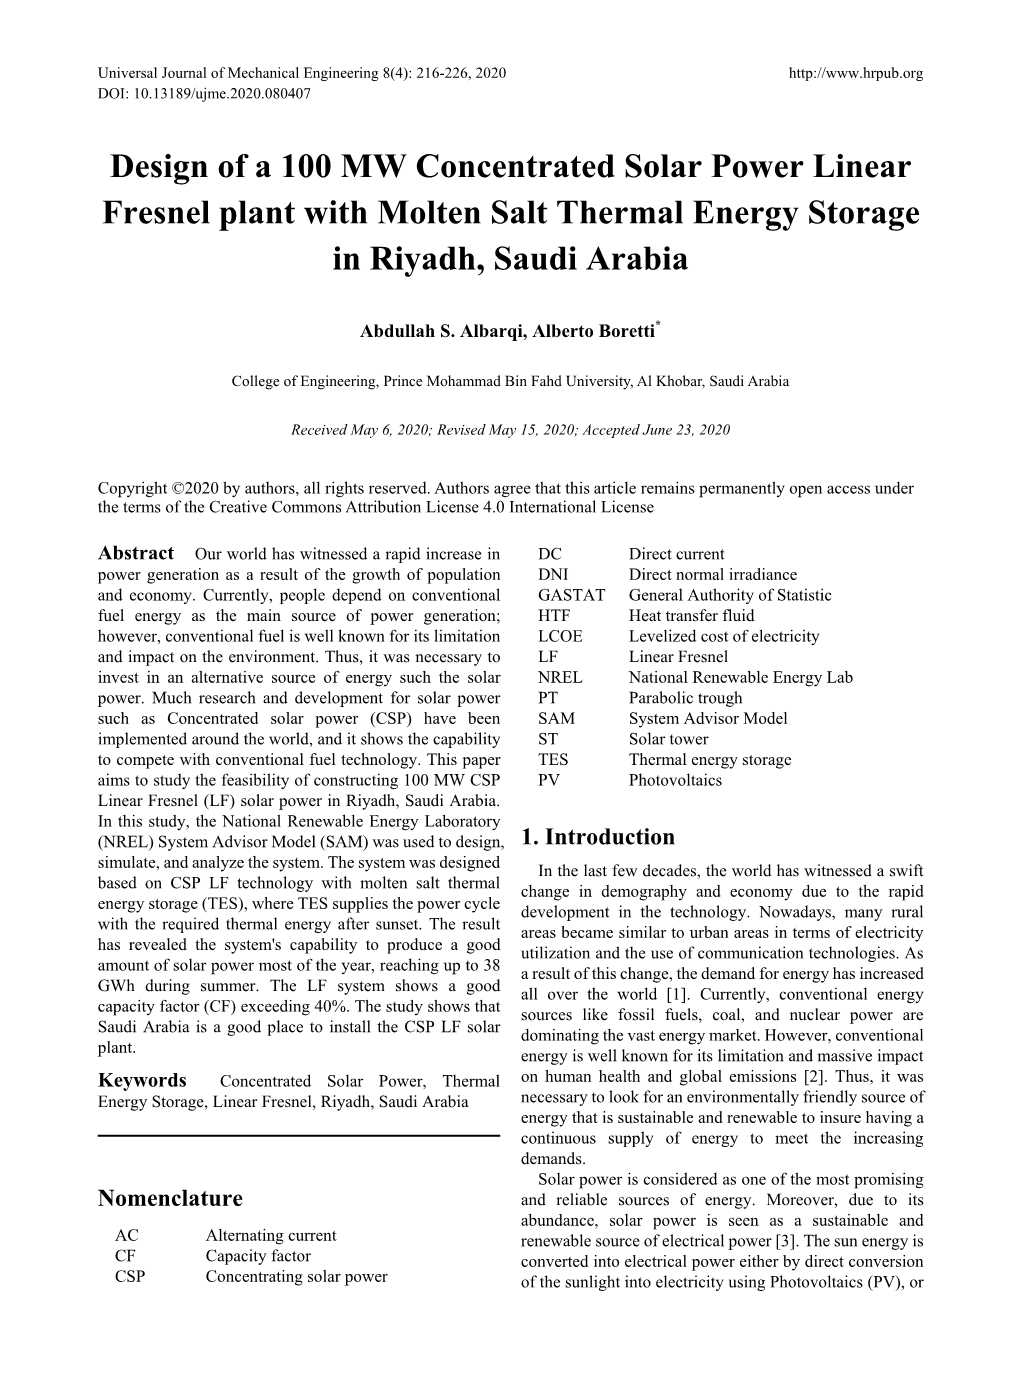 Design of a 100 MW Concentrated Solar Power Linear Fresnel Plant with Molten Salt Thermal Energy Storage in Riyadh, Saudi Arabia